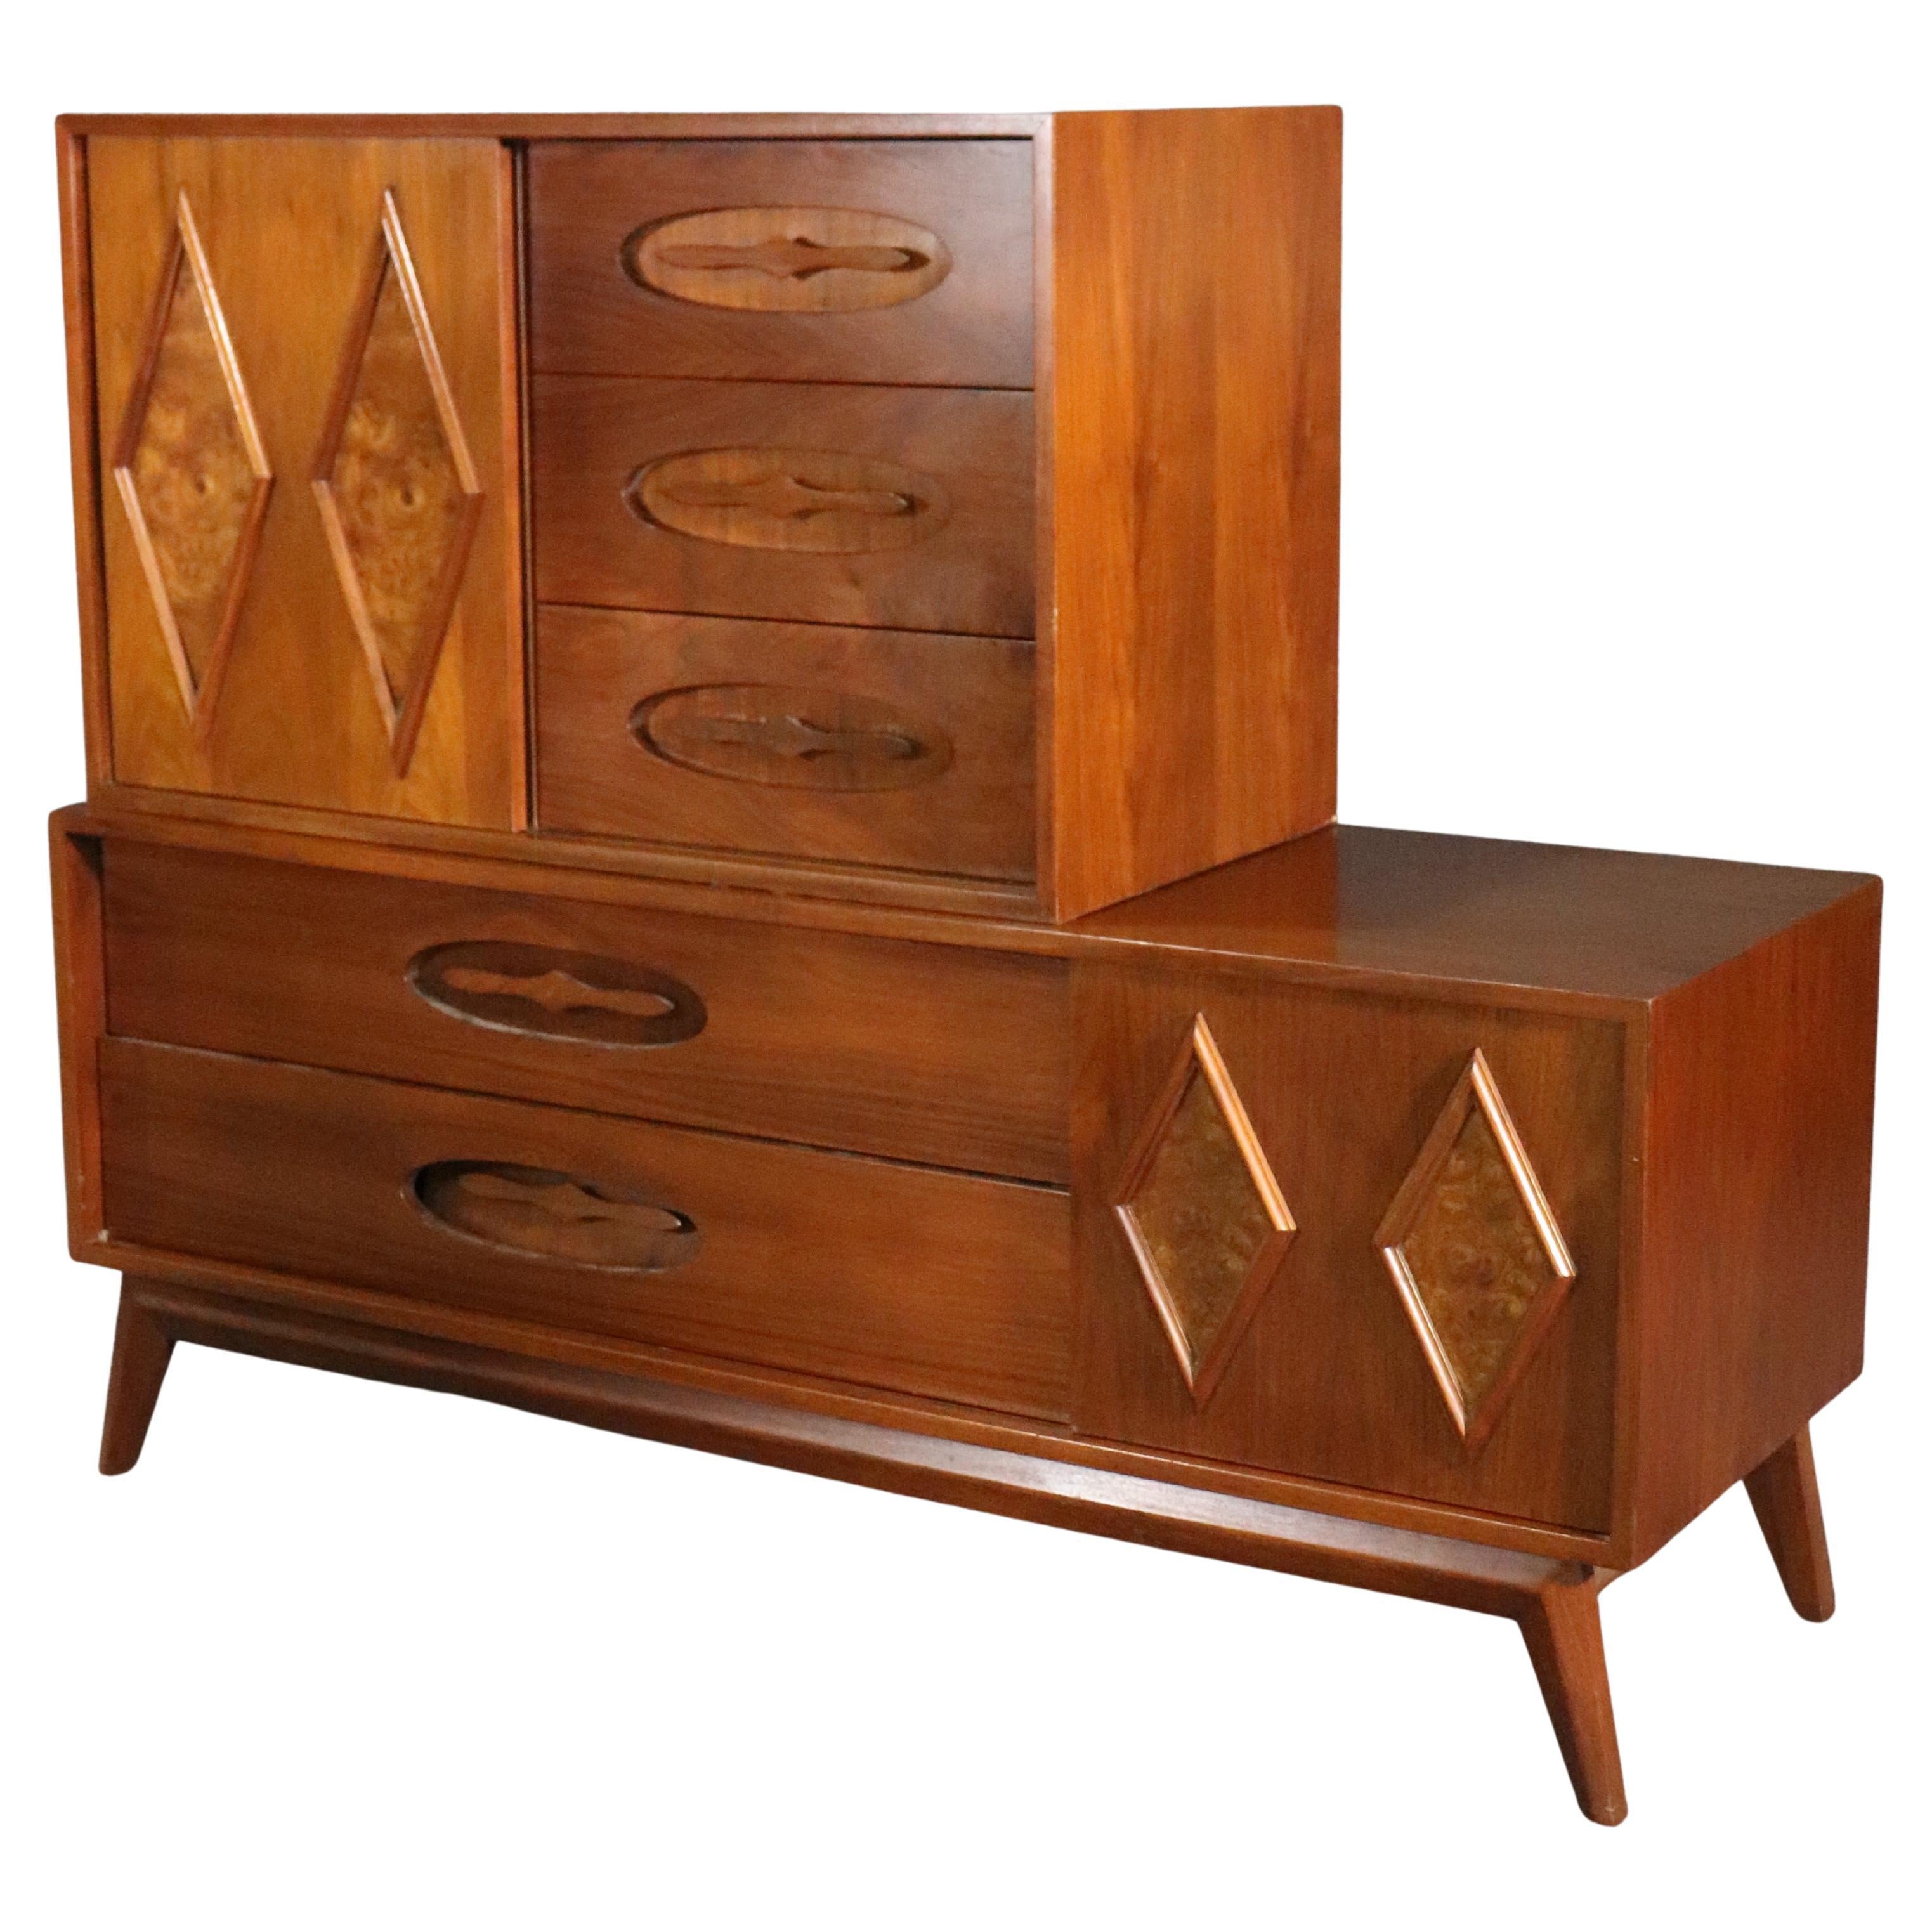 Vintage 2-Piece Diamond Dresser by Young Manufacturing